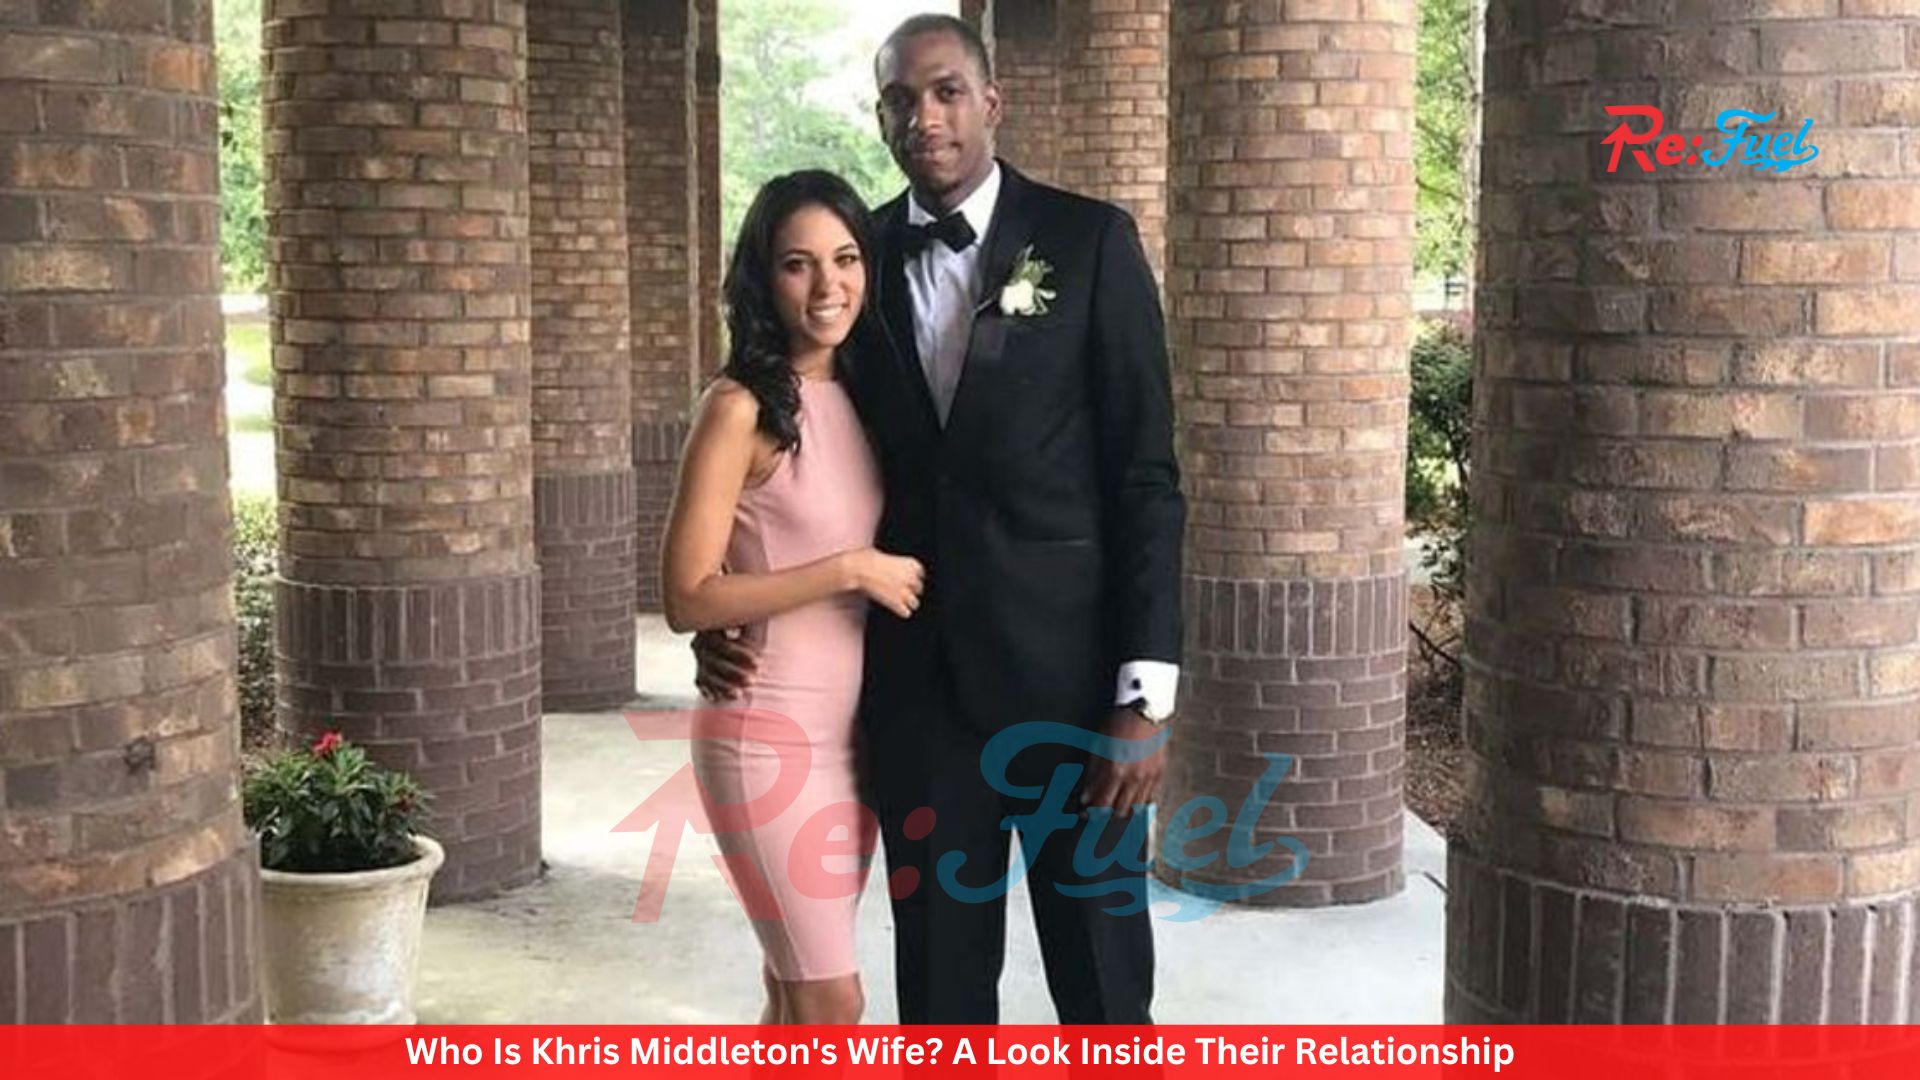 Who Is Khris Middleton's Wife? A Look Inside Their Relationship